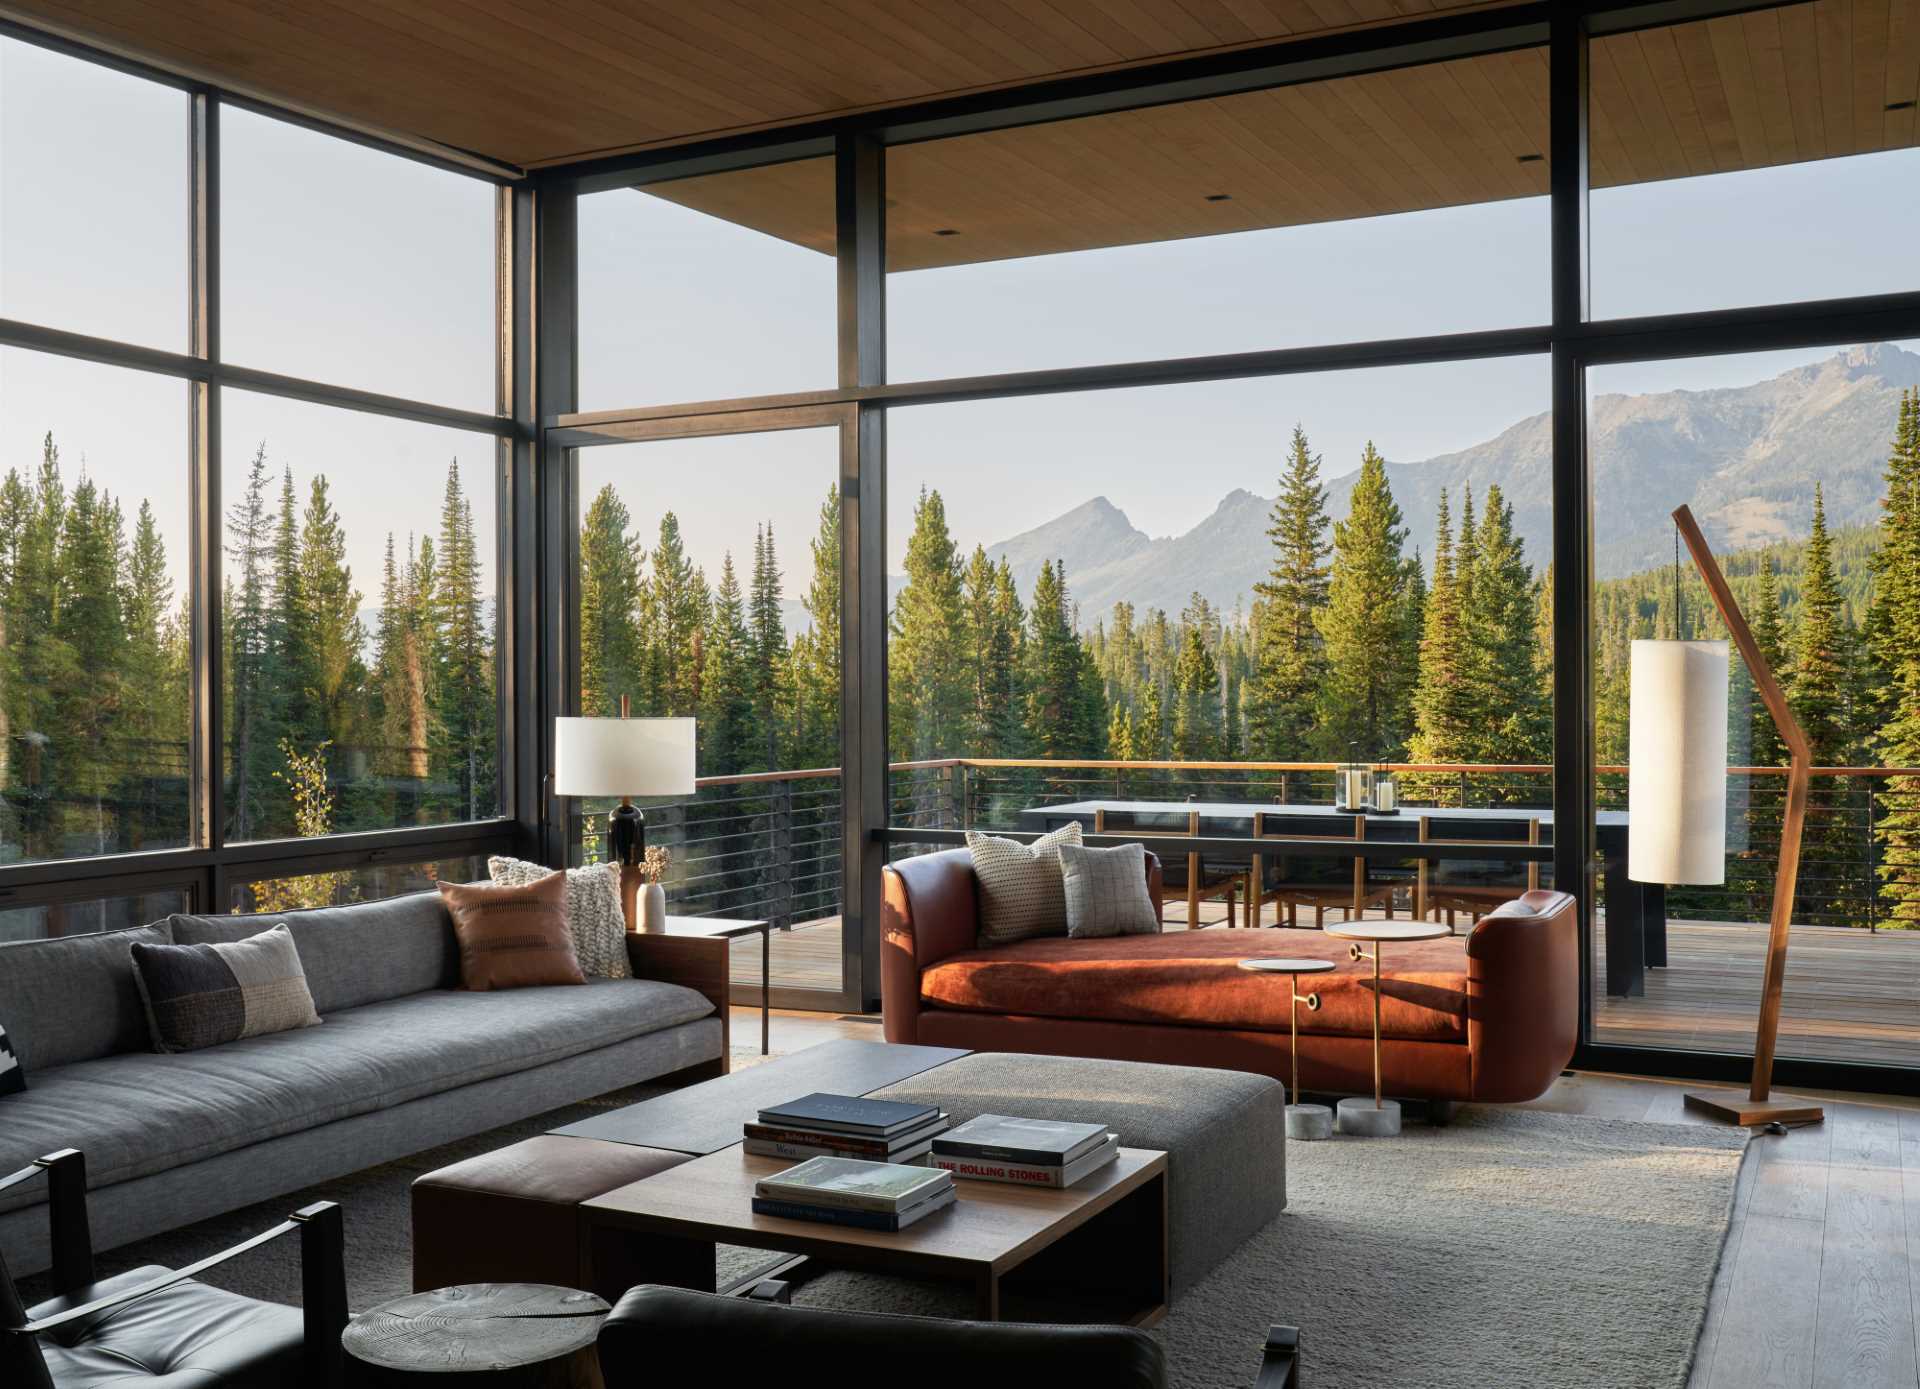 Large windows showcase the mountain views in this contemporary home.